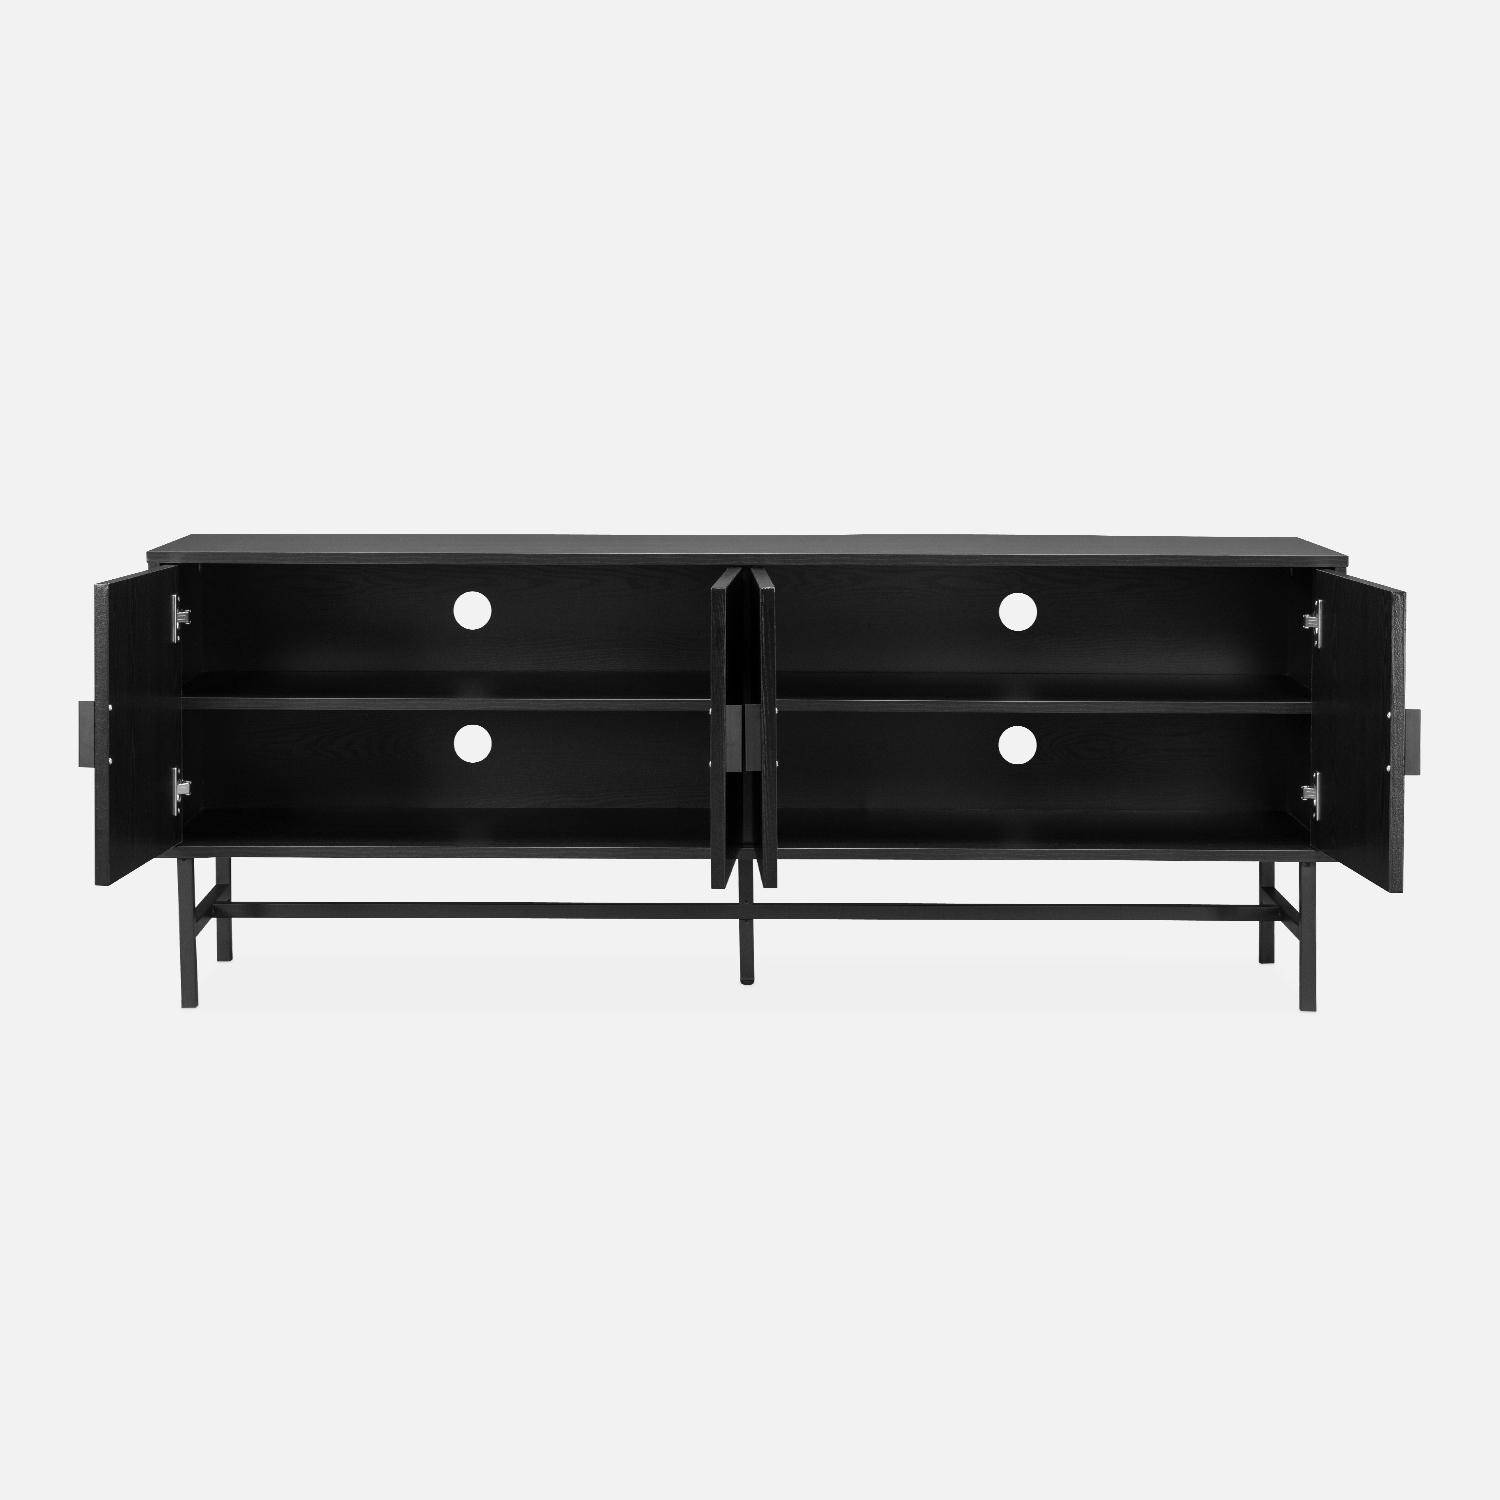 TV stand with two doors and one shelf, ridged effect, industrial style, 160x39x60cm - Bazalt - Black,sweeek,Photo6